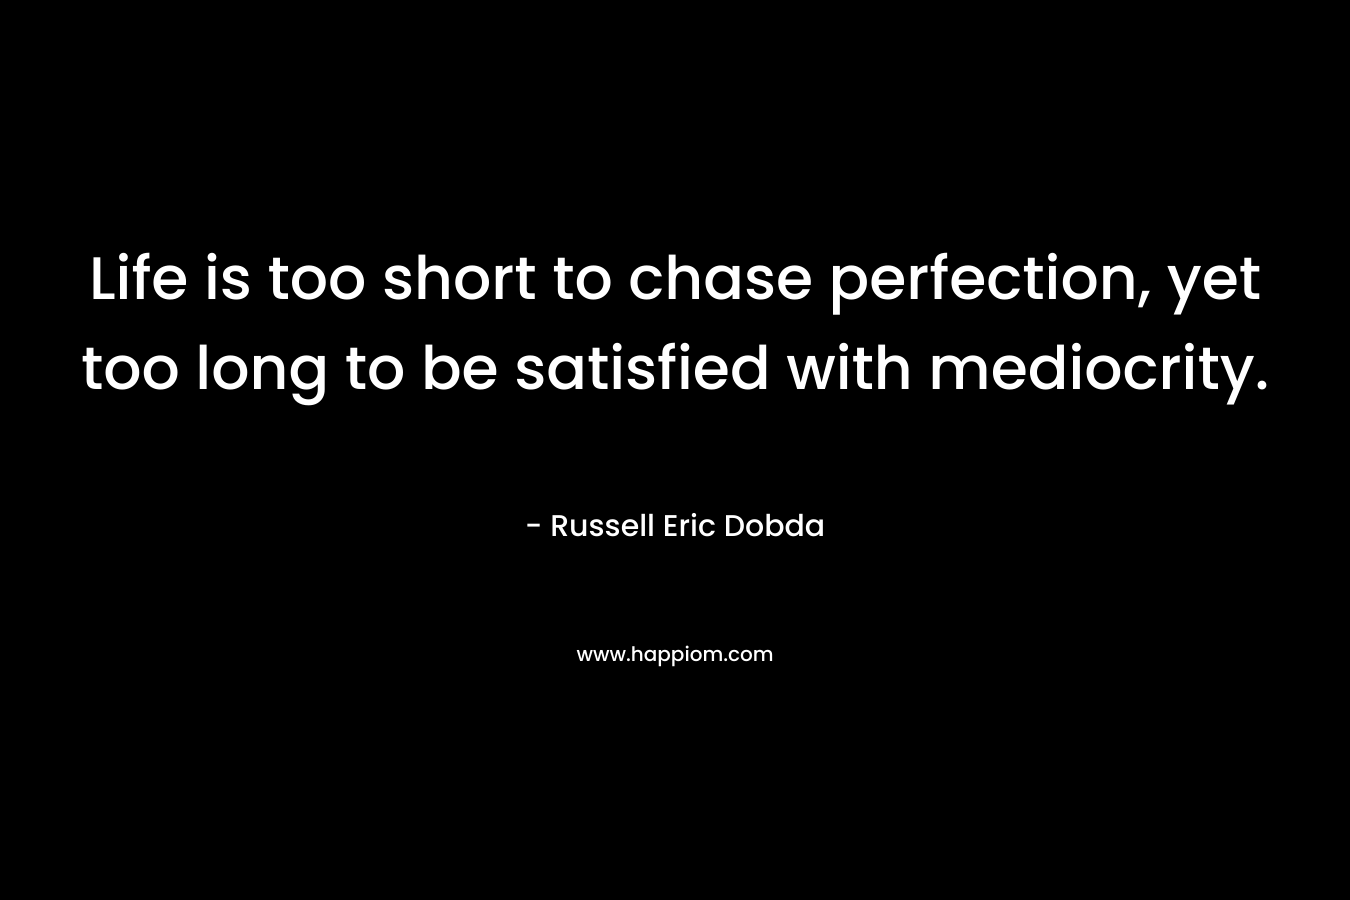 Life is too short to chase perfection, yet too long to be satisfied with mediocrity. – Russell Eric Dobda